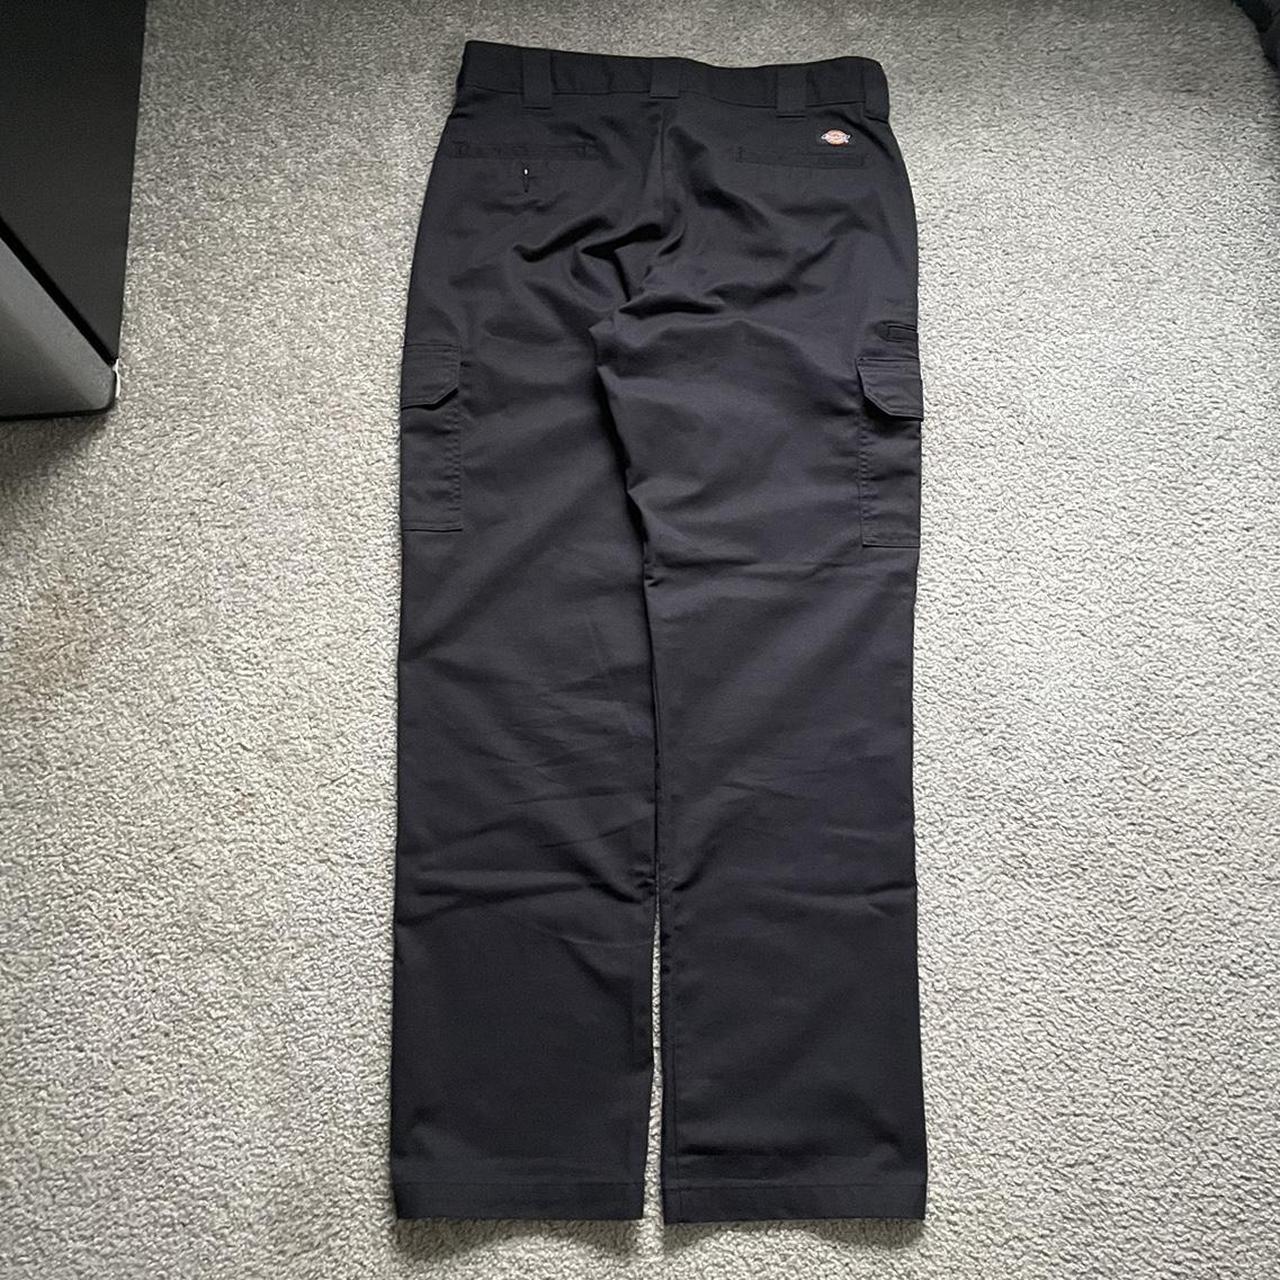 2000s dickies cargo pants fit like a size 35 x... - Depop